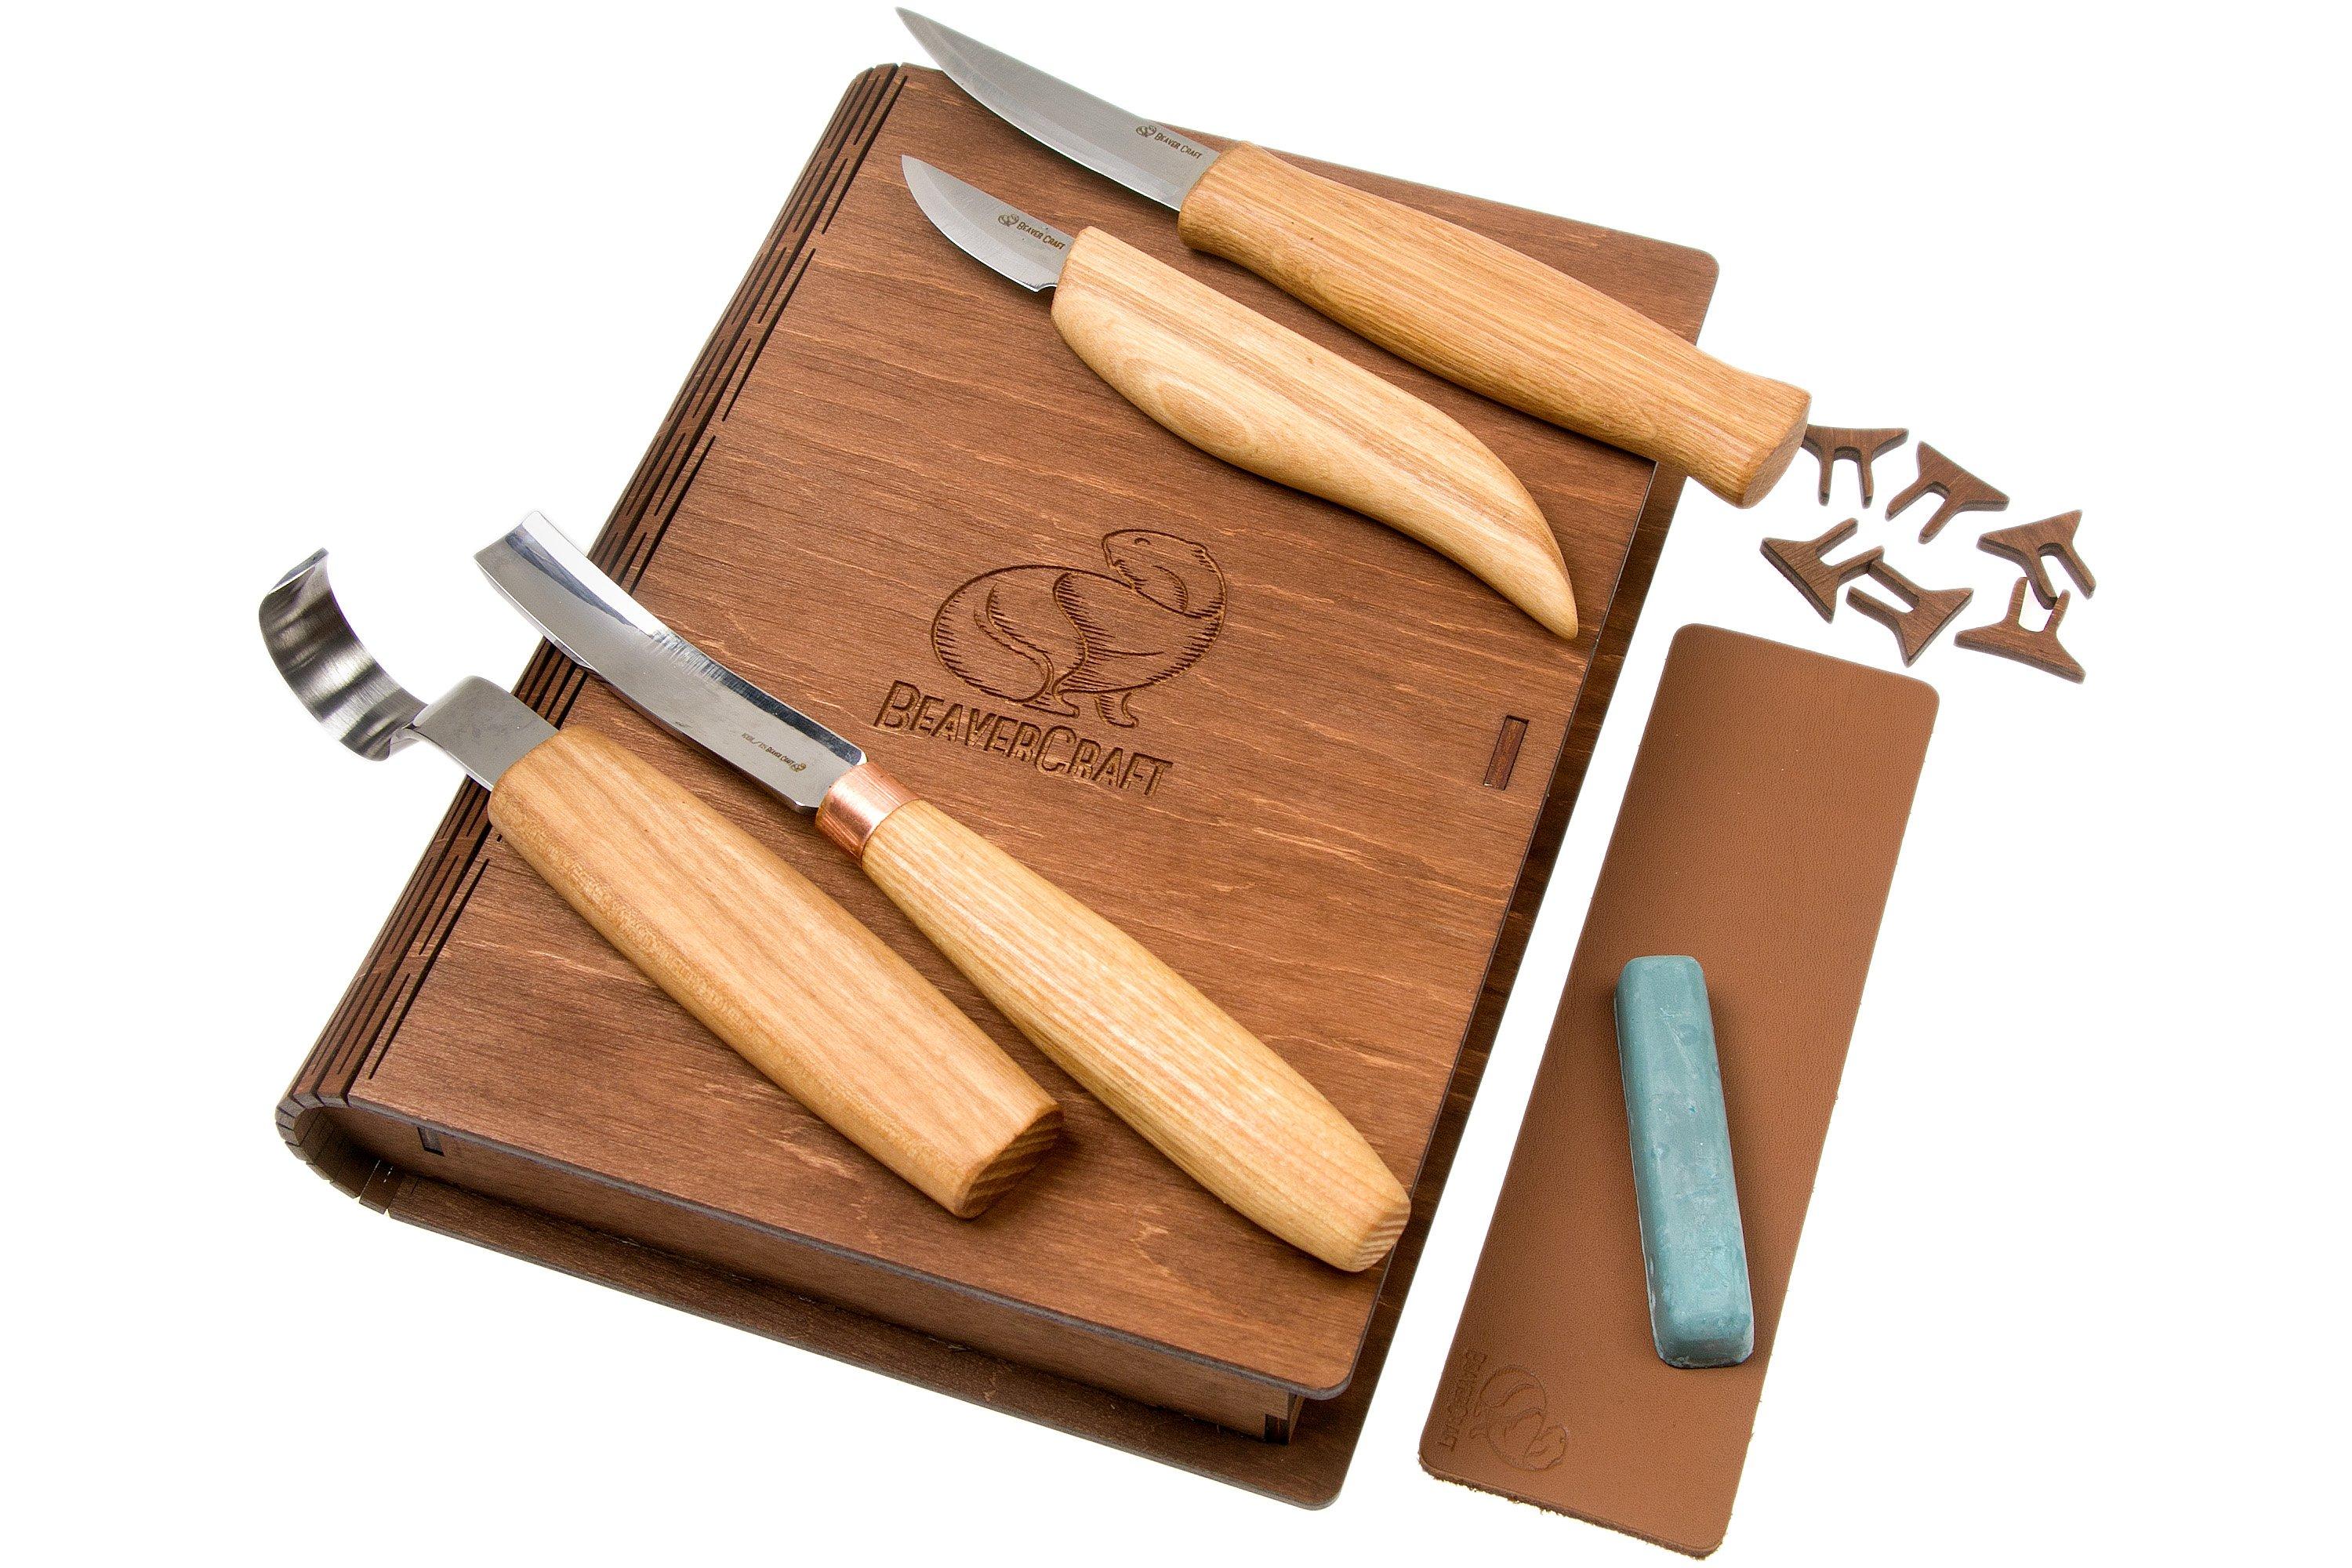 BeaverCraft Deluxe Large Wood Carving Tool Set S50X, wood carving set